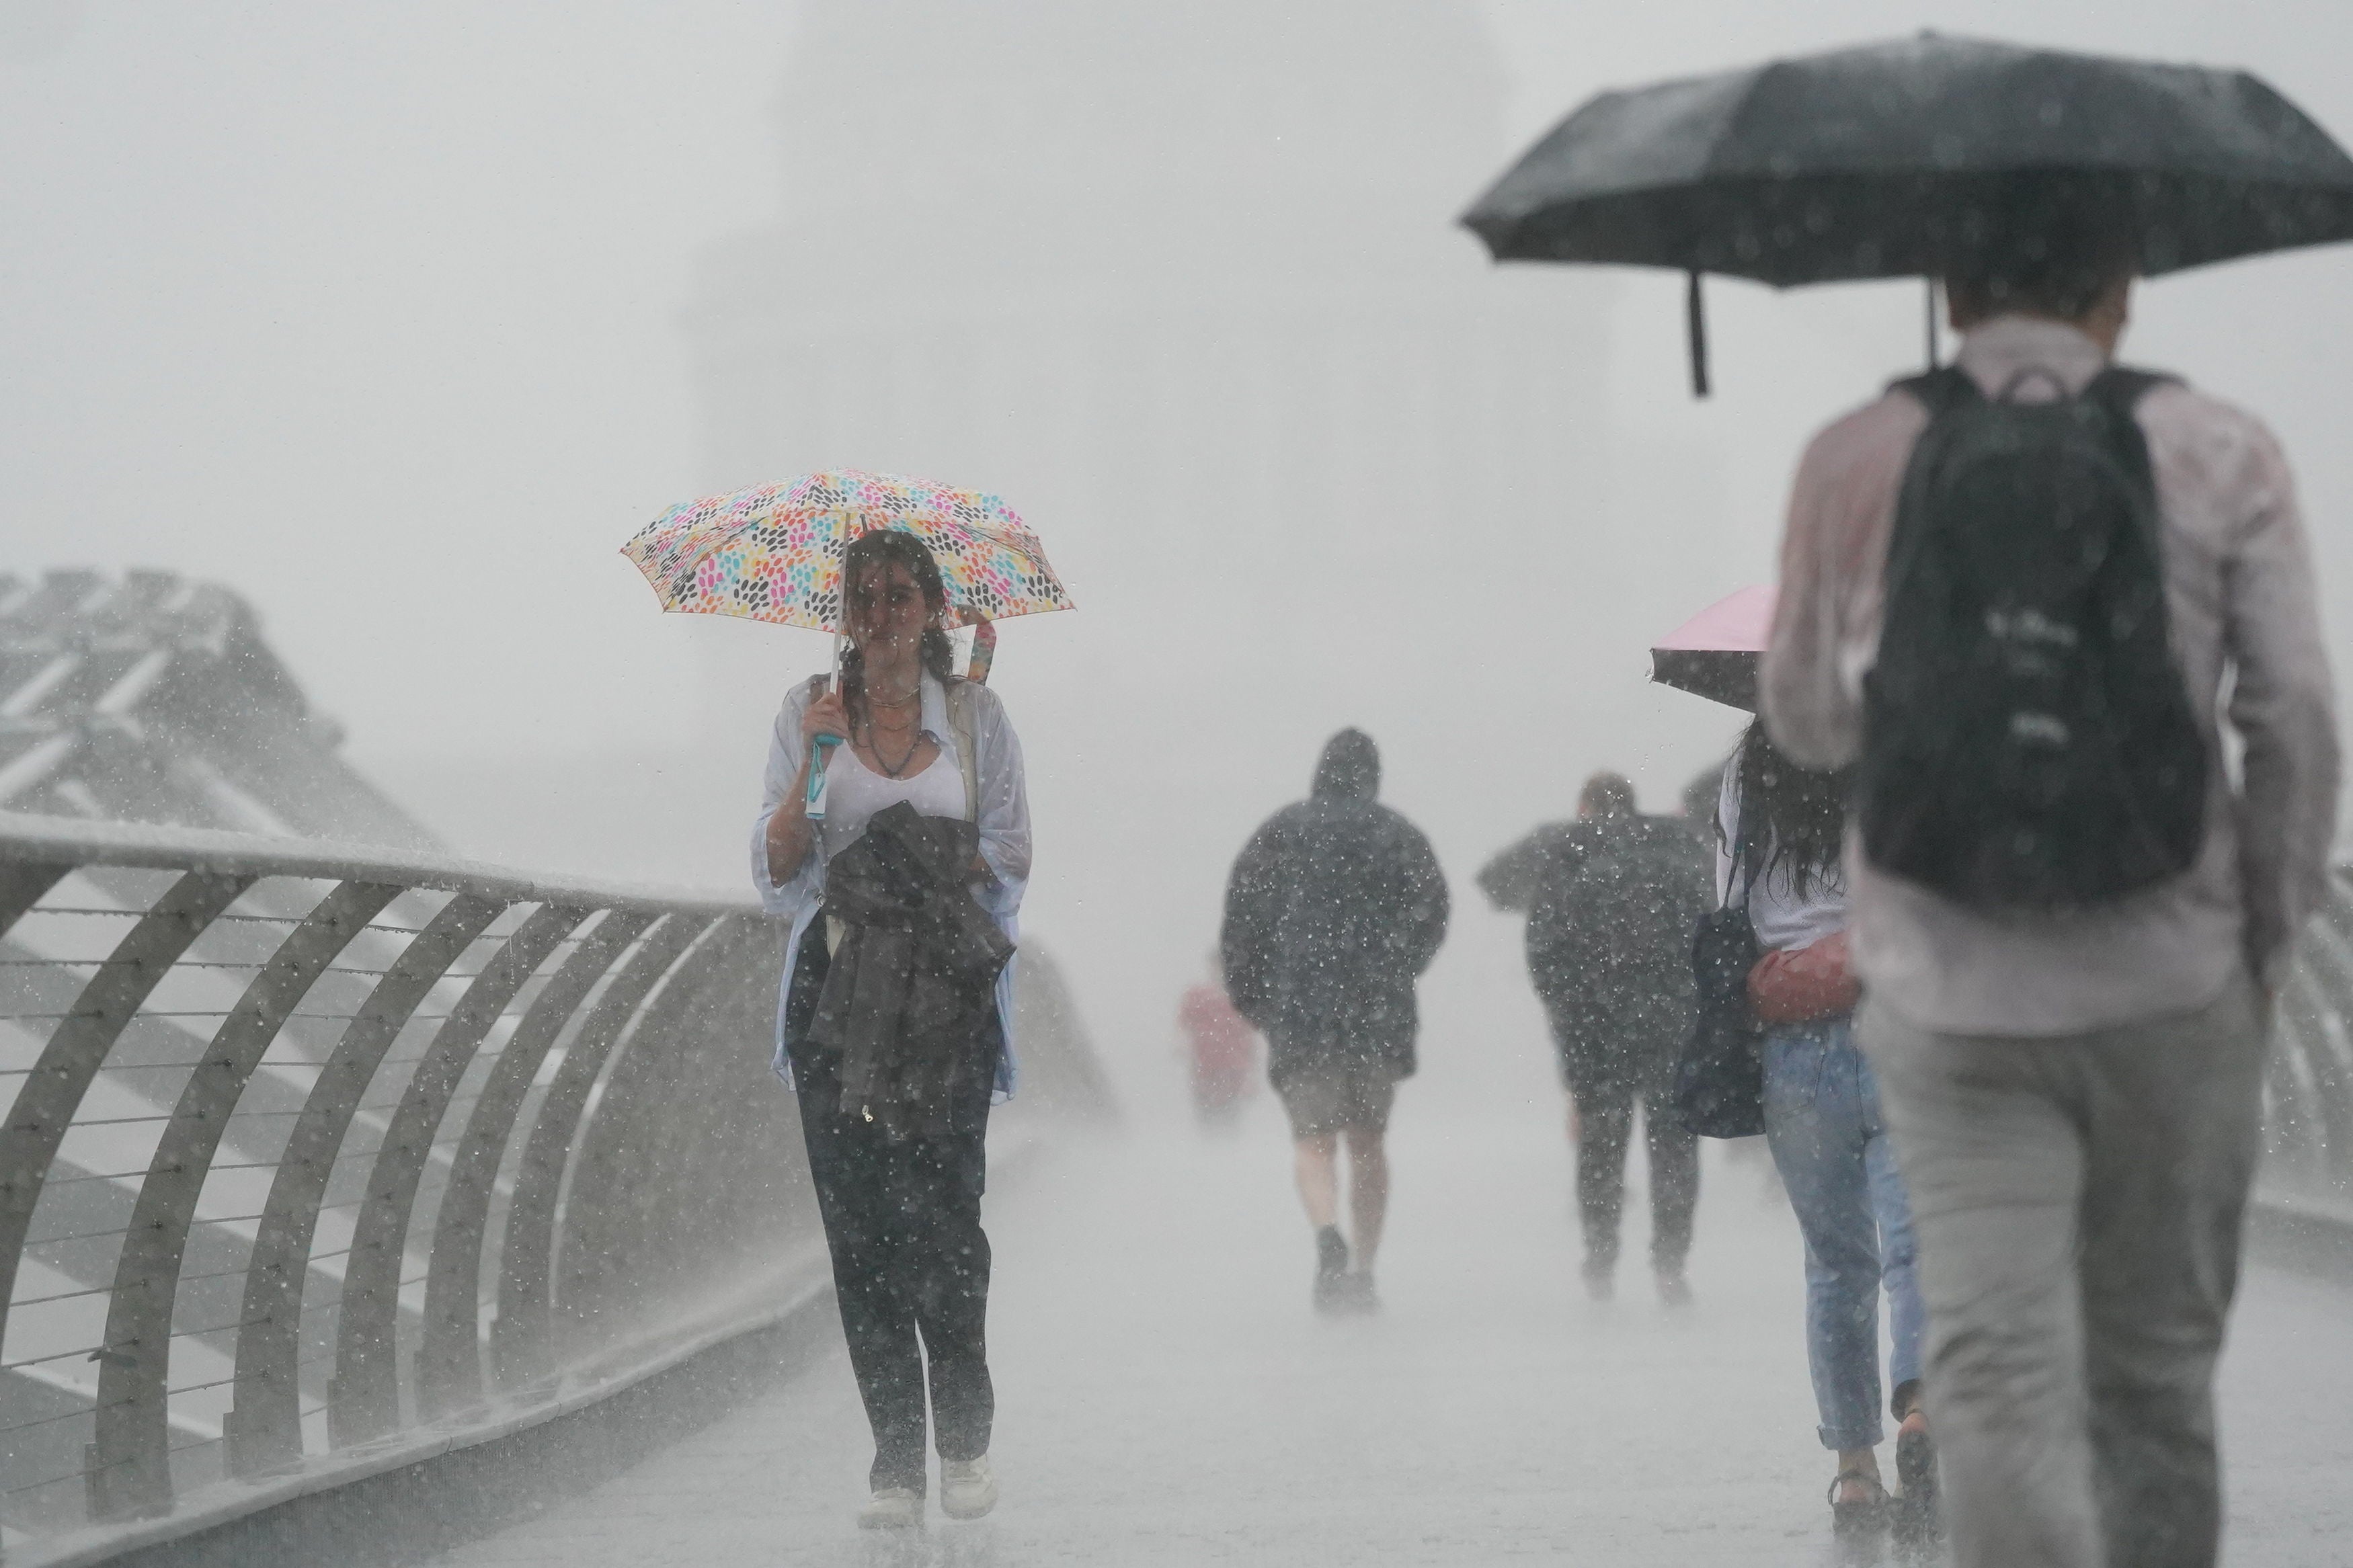 London’s Millennium Bridge as rain fell heavily for the first time after the heatwave